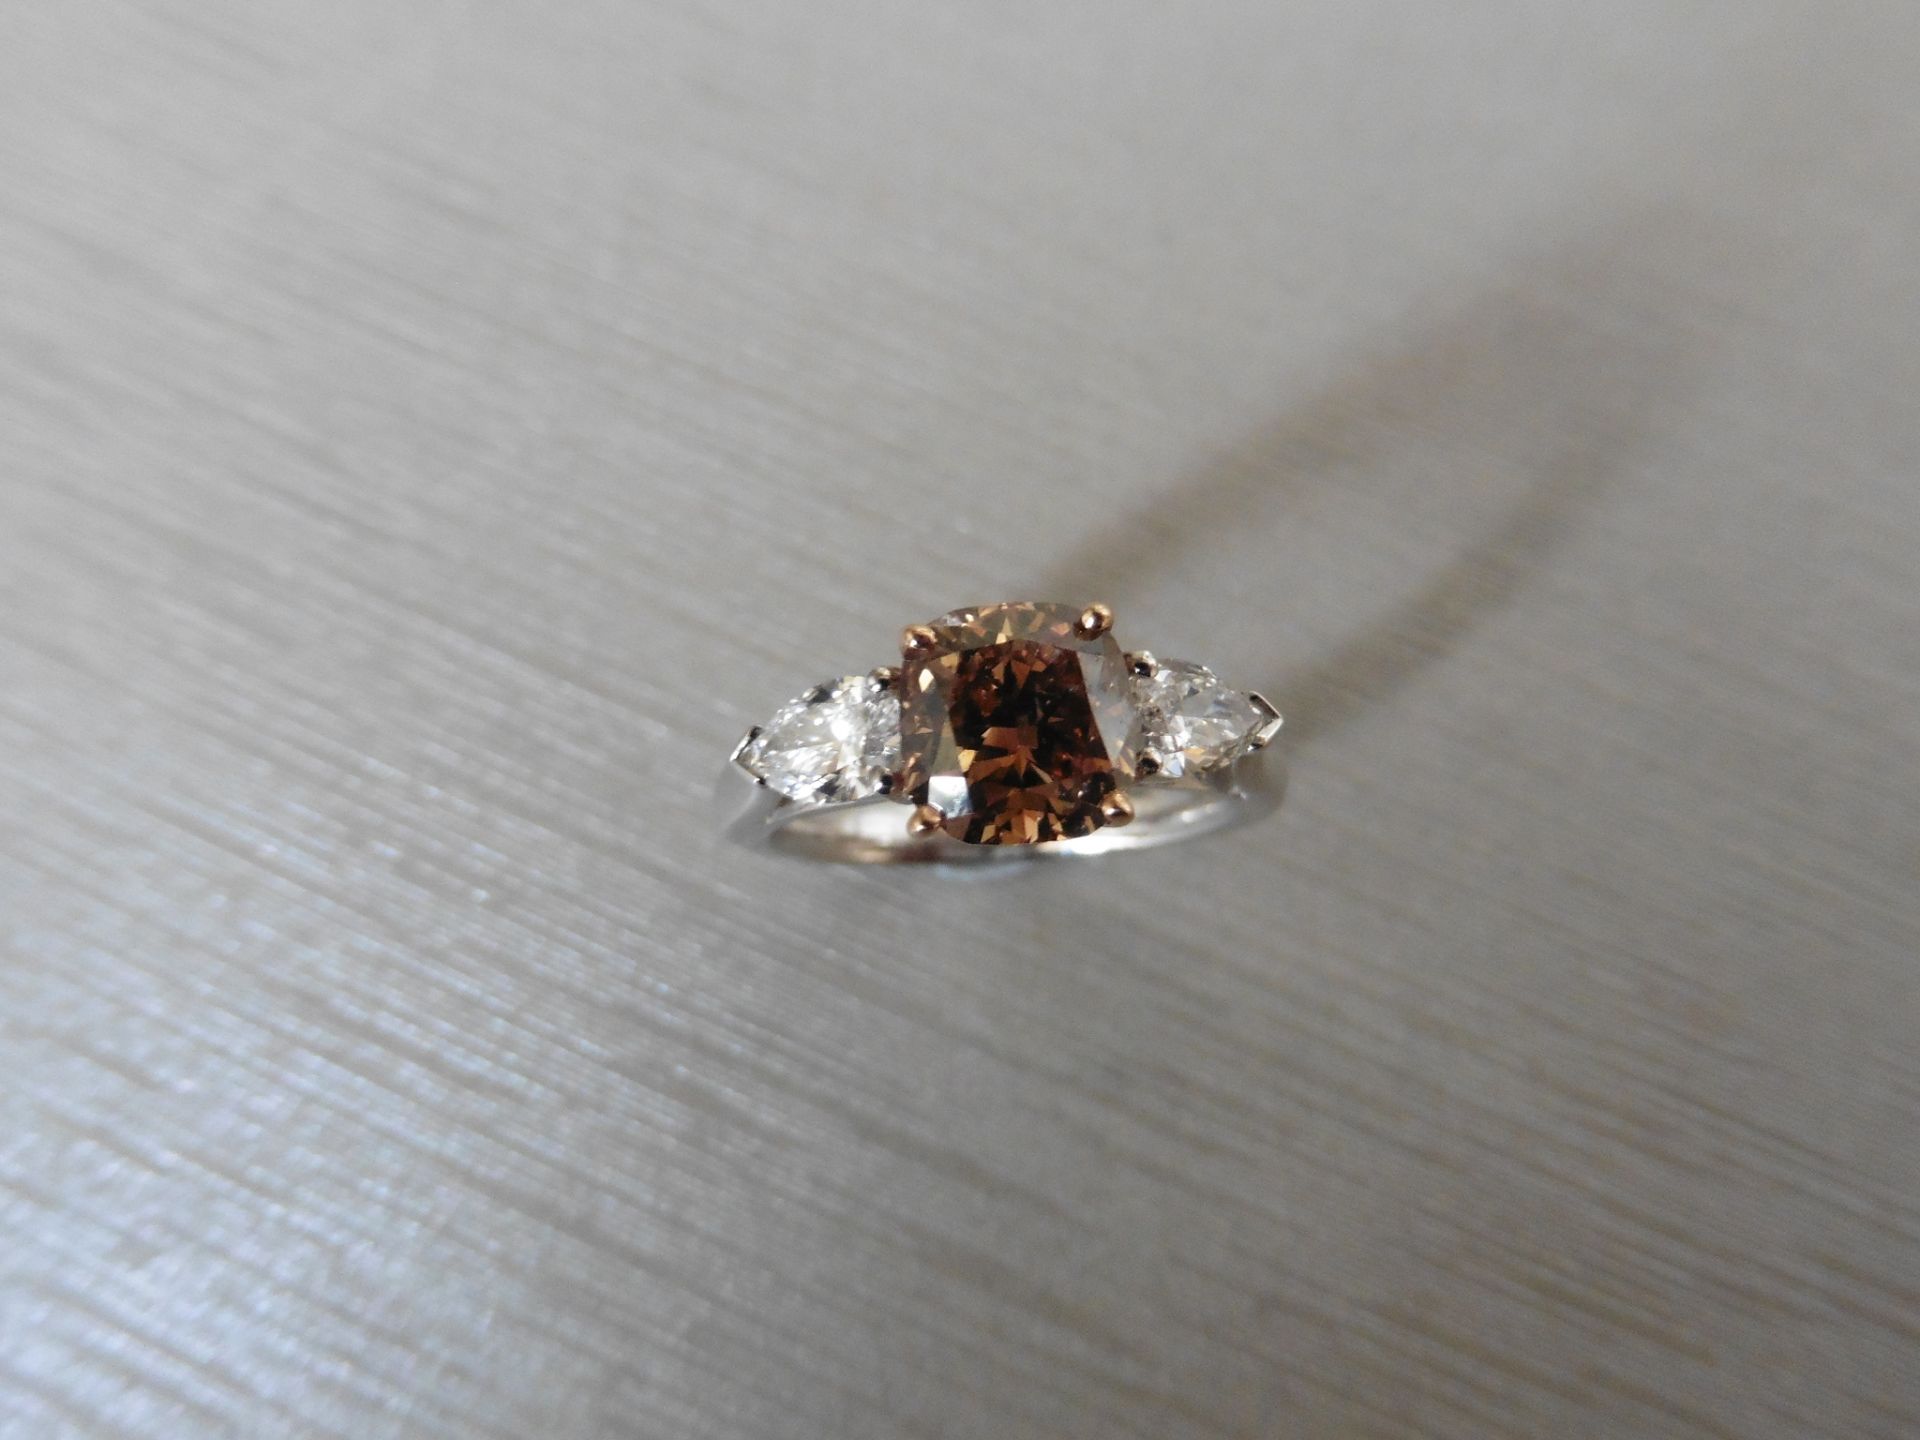 2.17ct diamond three stone ring set with a brown cushion cut diamond weighing 1.65ct, VVS2. Either - Image 4 of 4